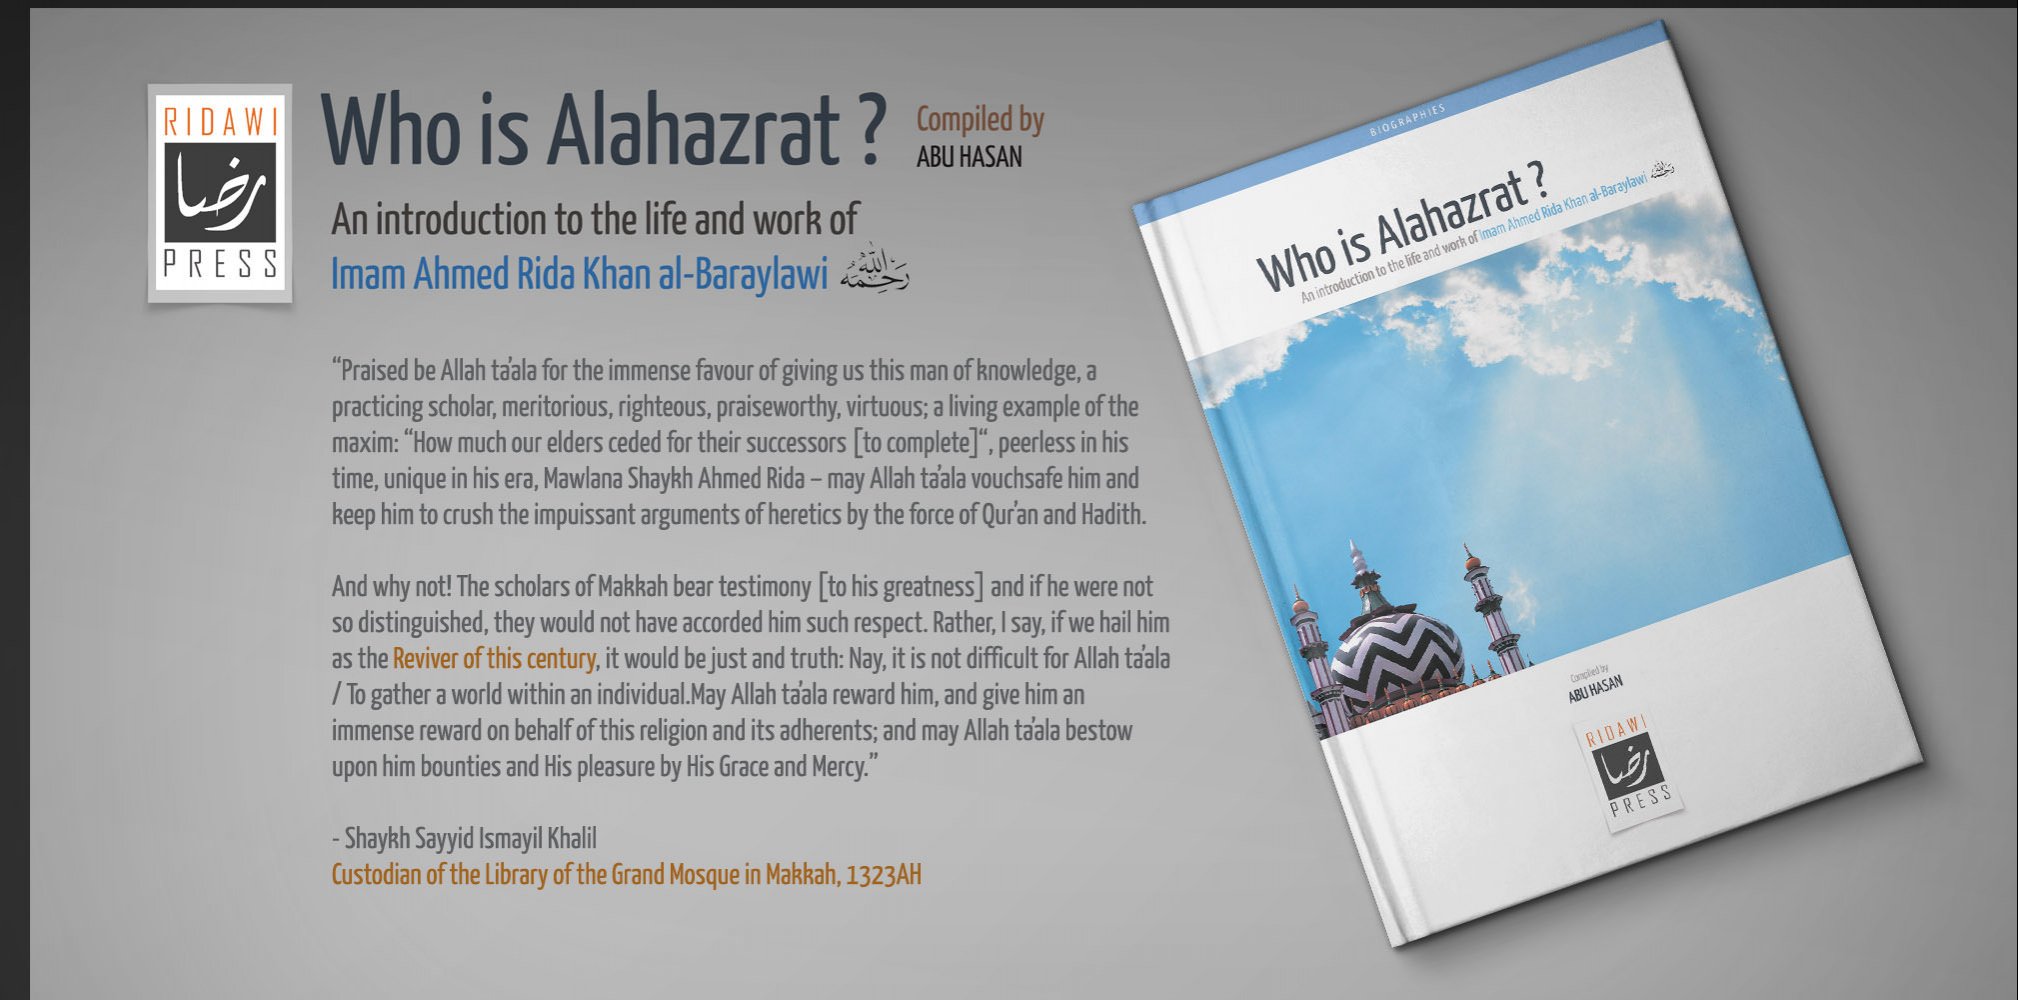 Book Release: Who is Alahazrat?